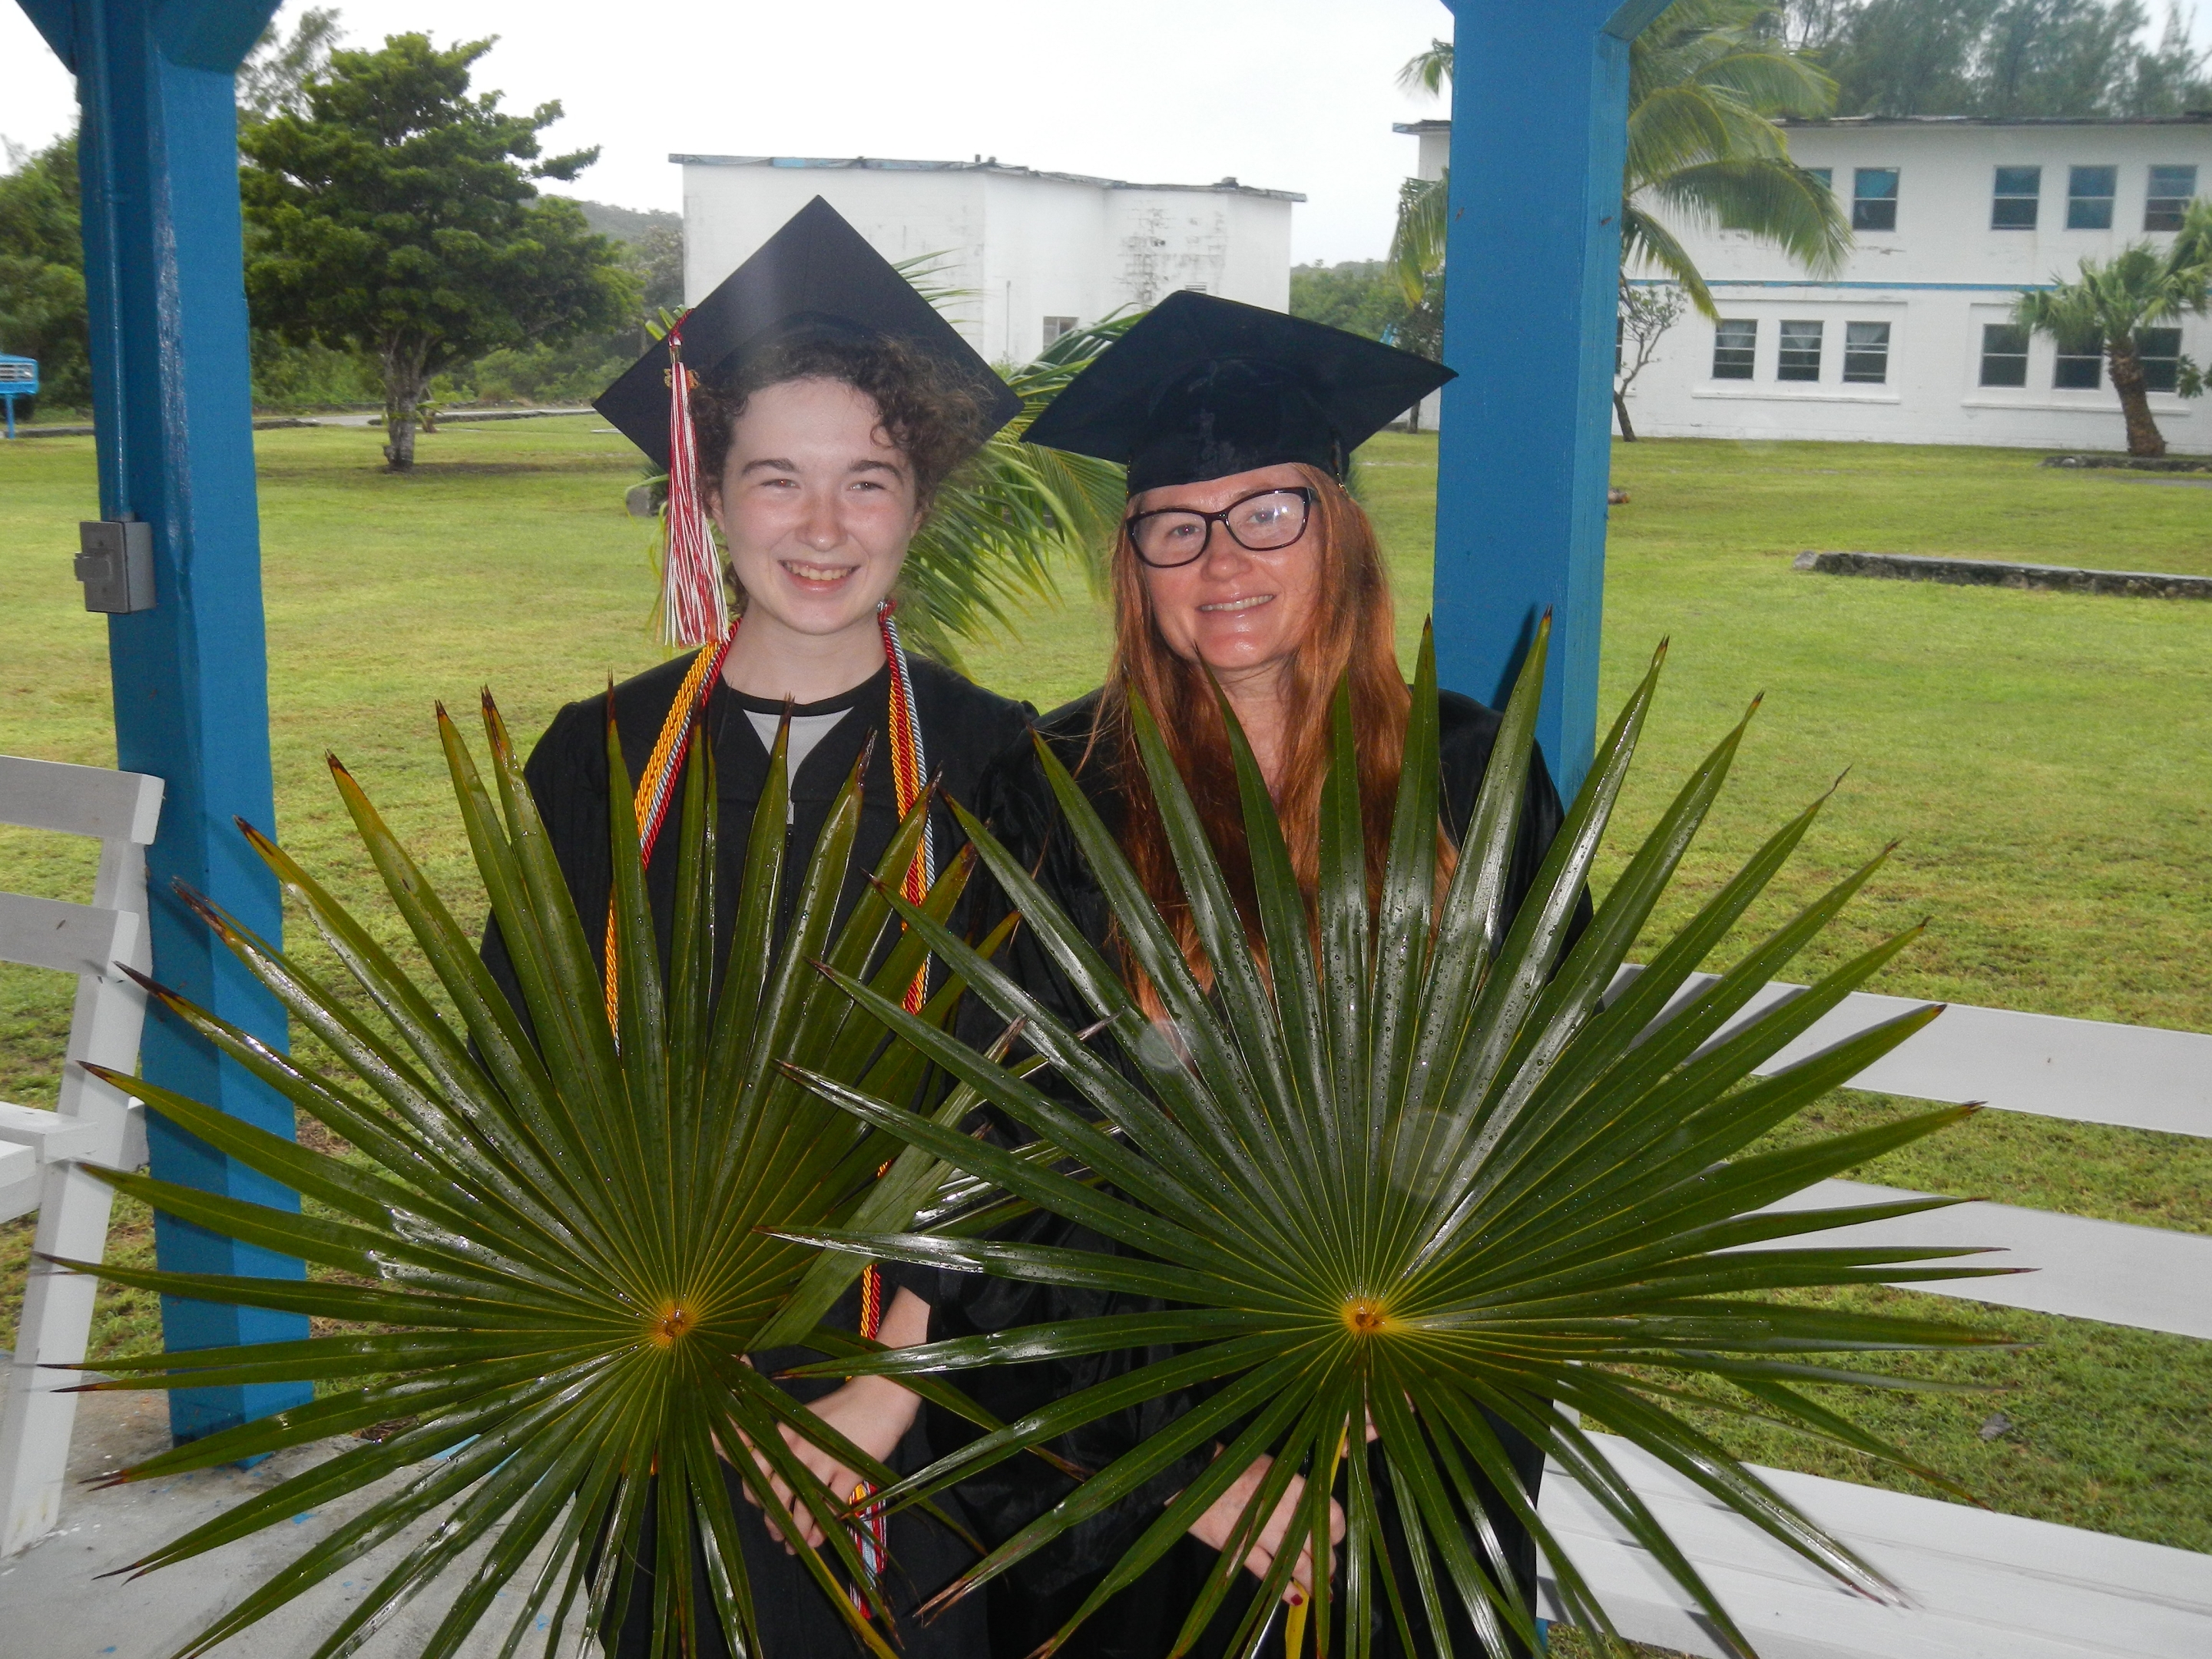 Graduates Darcy McTigue and Rachael Smith with their palm fronds